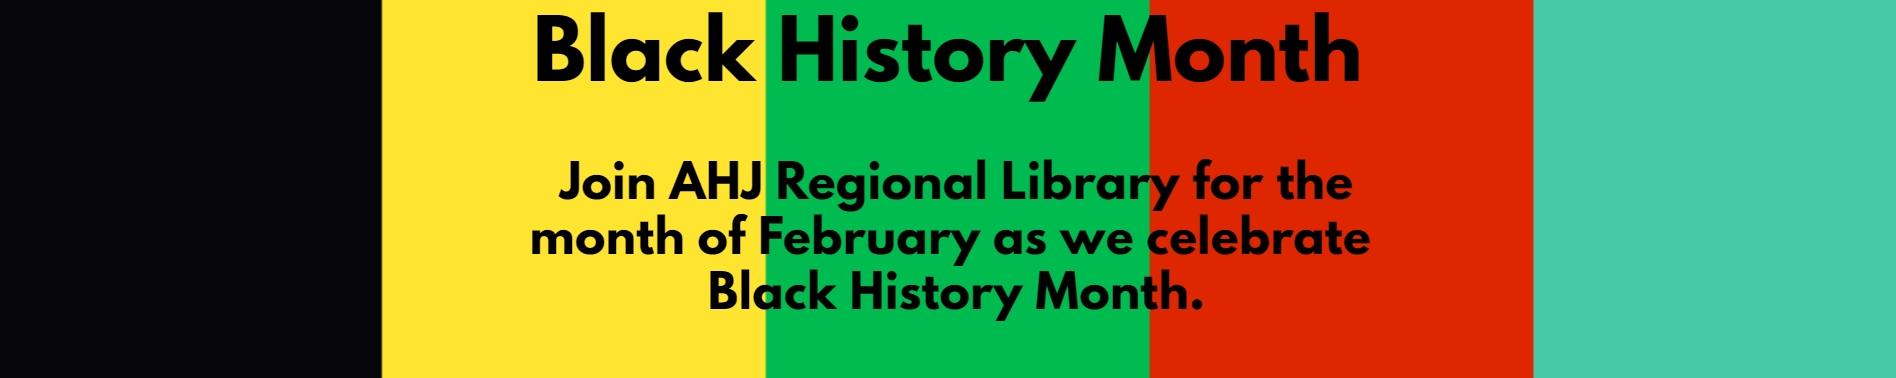 Join AHJ Regional Library for month of February as we celebrate Black History Month.